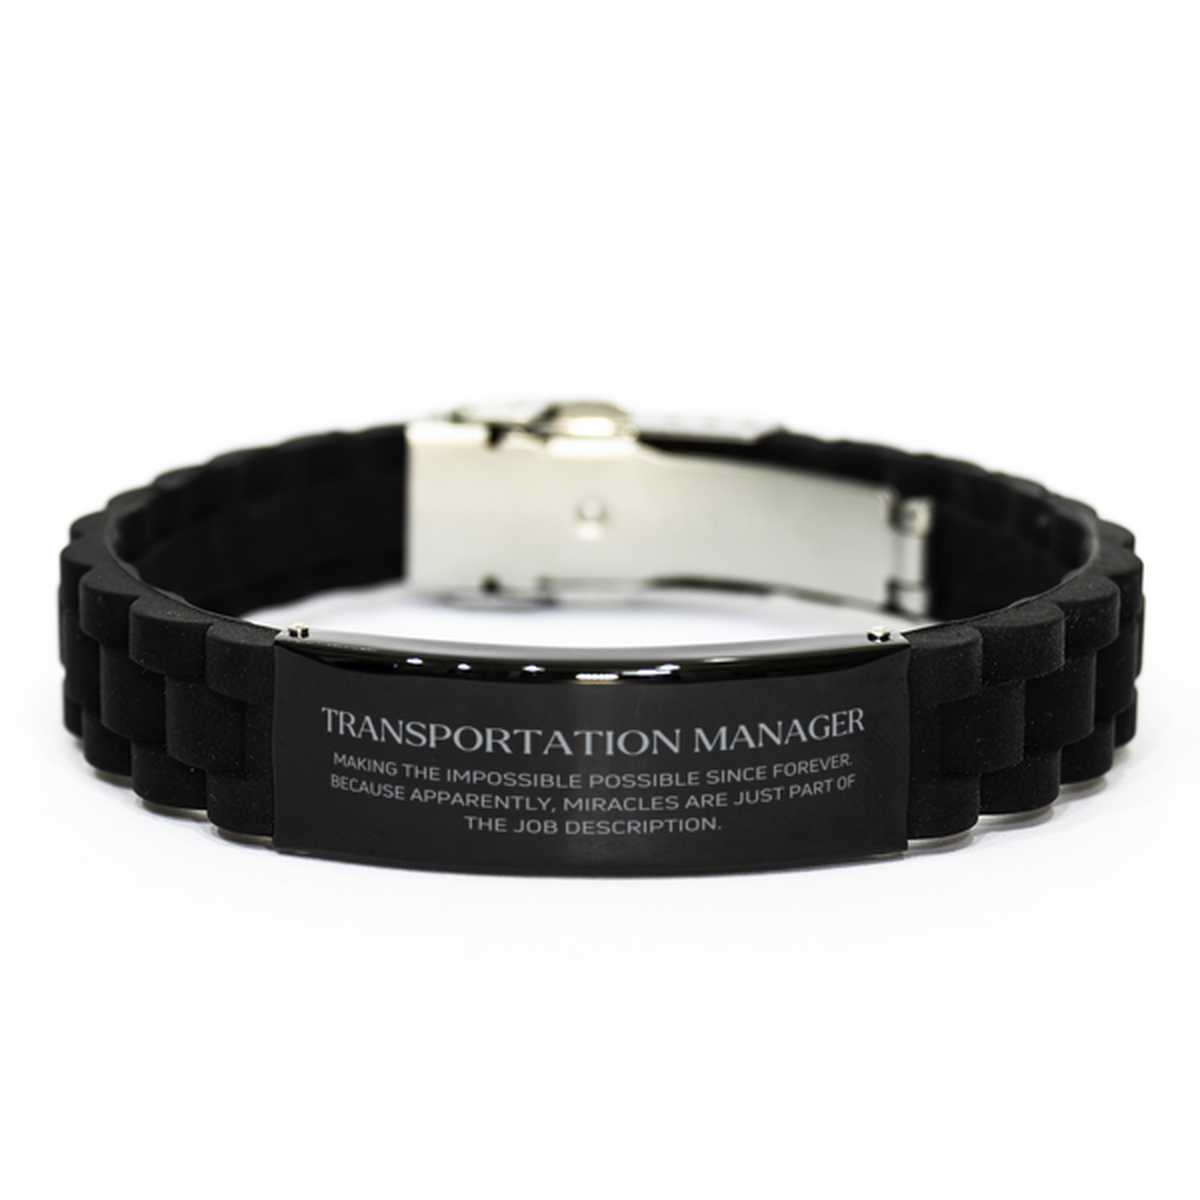 Funny Transportation Manager Gifts, Miracles are just part of the job description, Inspirational Birthday Black Glidelock Clasp Bracelet For Transportation Manager, Men, Women, Coworkers, Friends, Boss